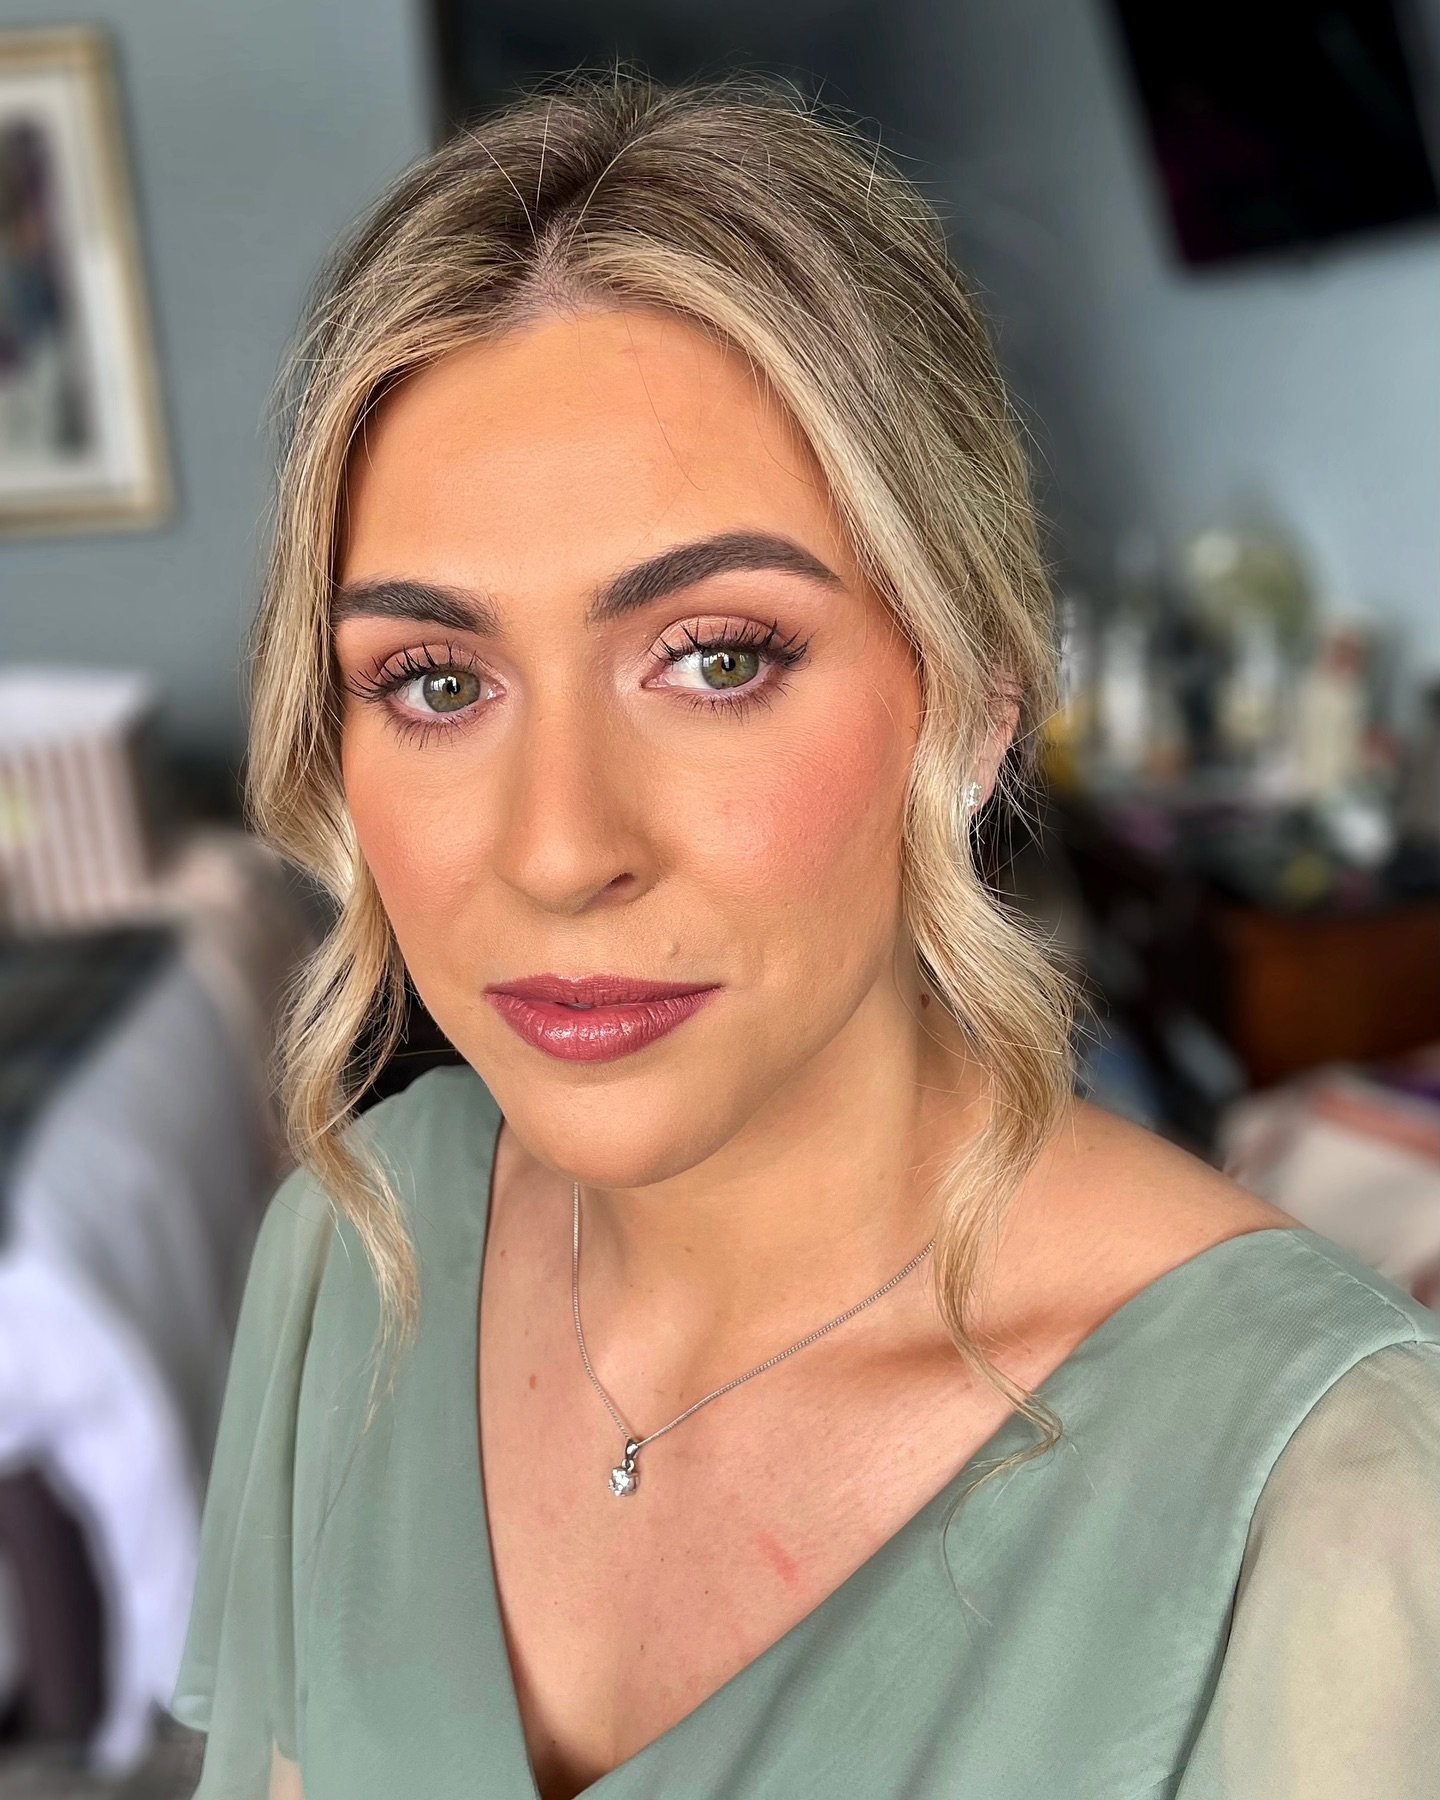 ✨Amy✨

Rosy Brown Dream!

A beautiful soft and subtle look that compliments Amy&rsquo;s stunning eyes and her gorgeous green bridesmaid gown. 

To complete the look, we chose the classic Pillow Talk lip from Charlotte Tilbury. This universally flatte